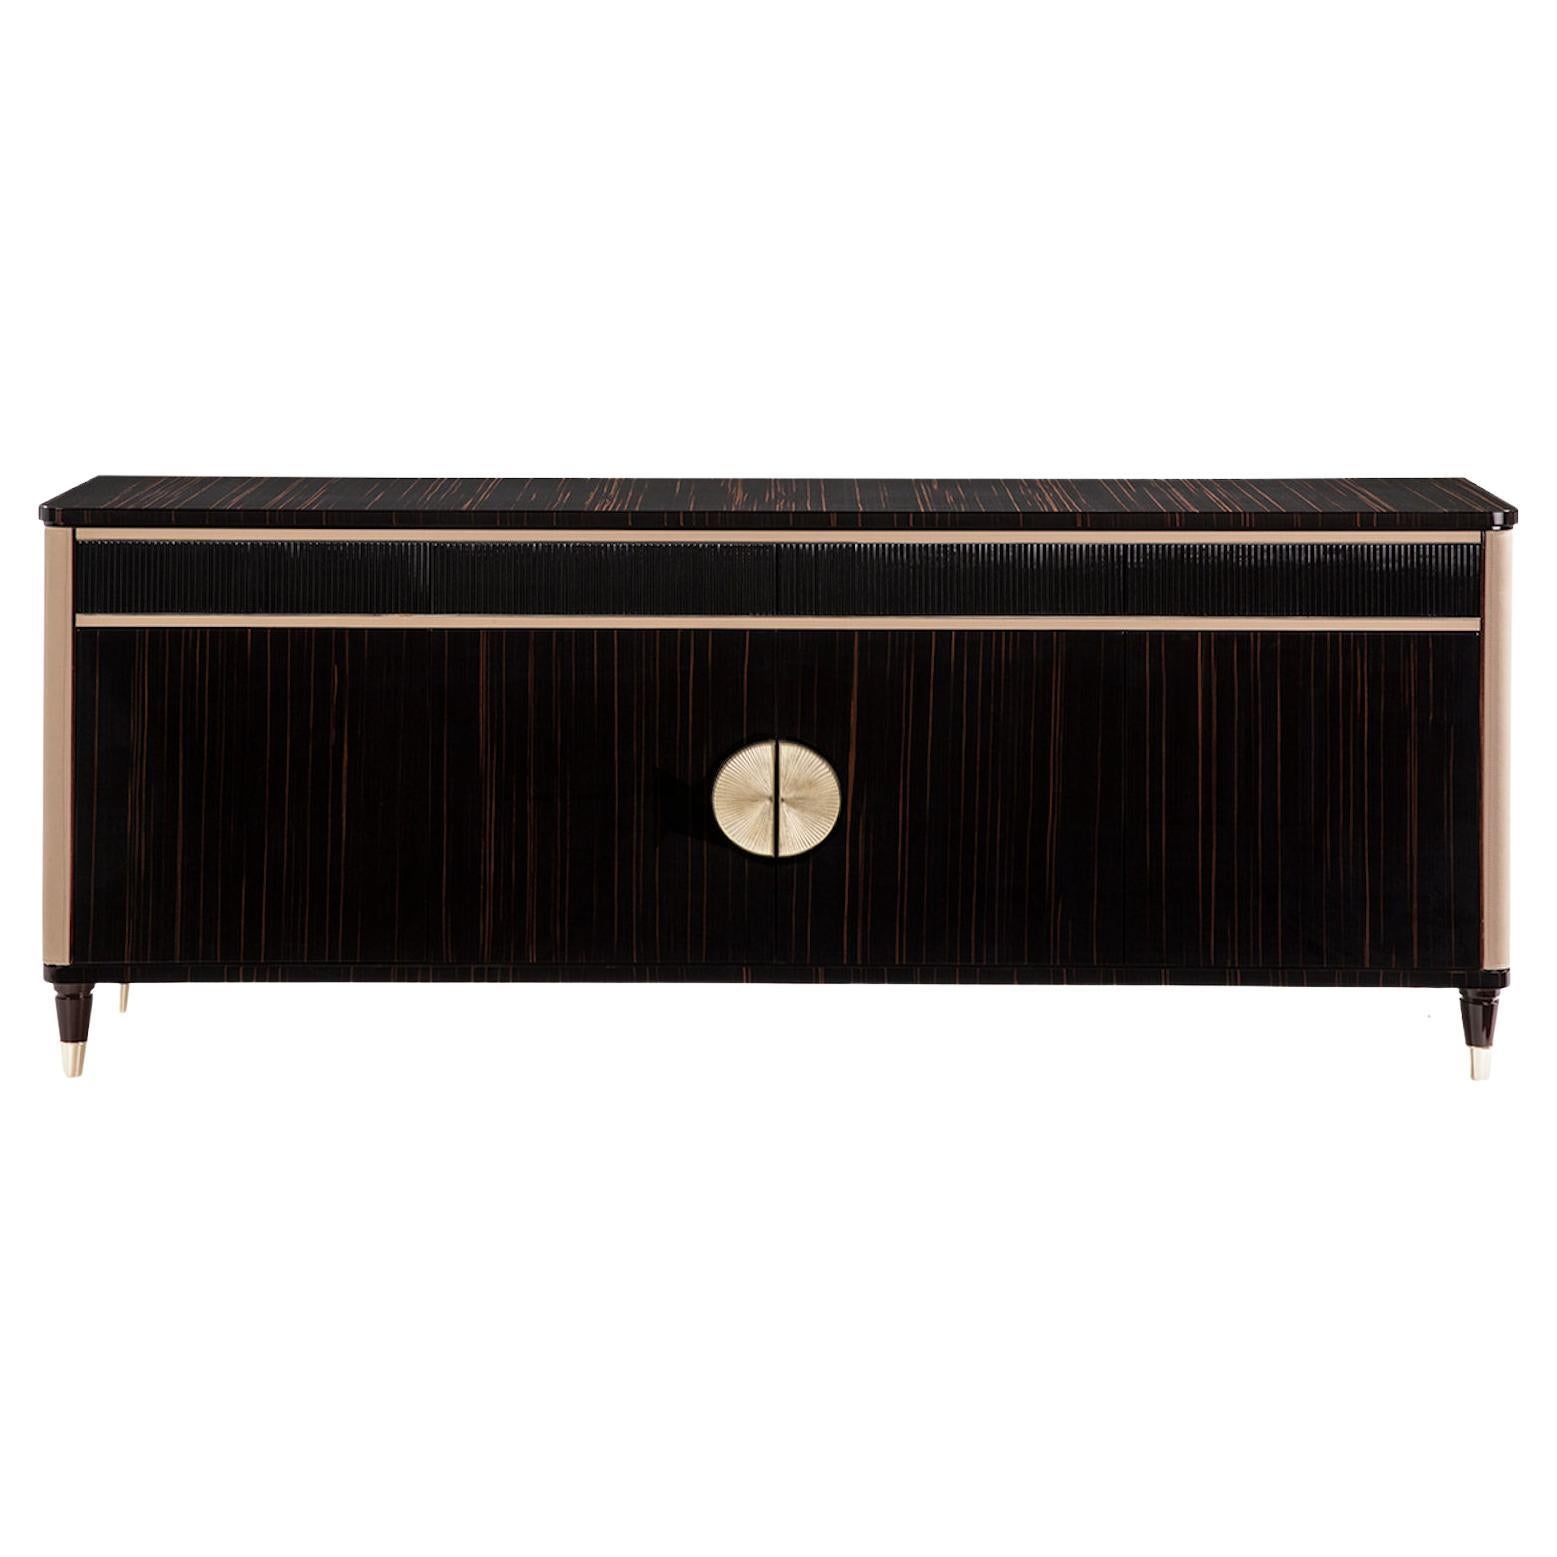 Cosulich Interiors & Antiques Sideboards